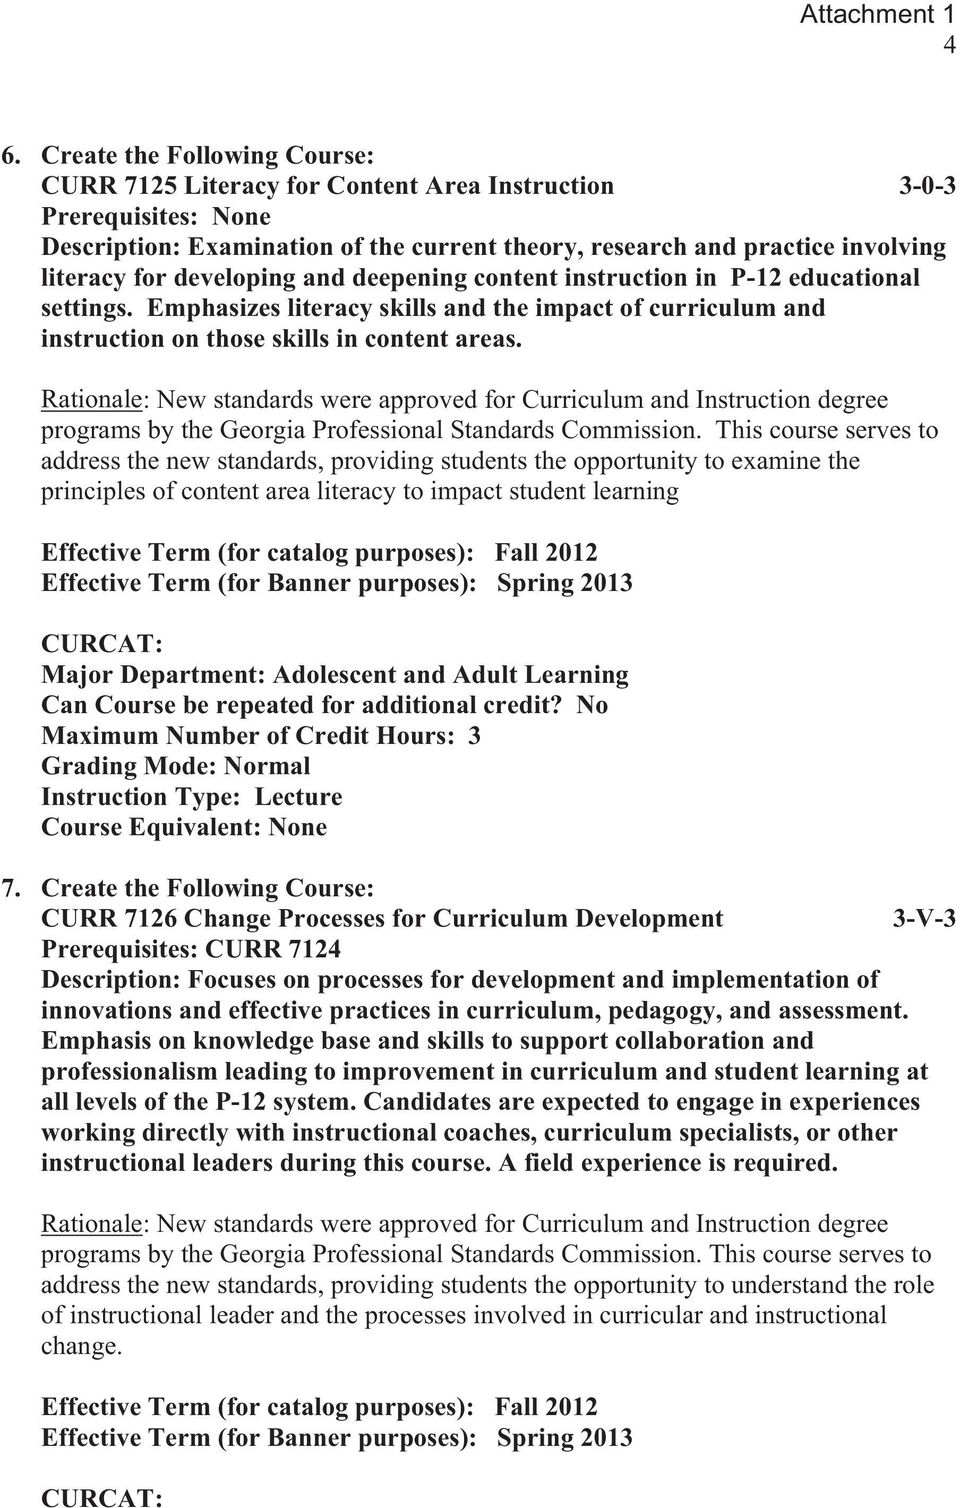 programs by the Georgia Professional Standards Commission.